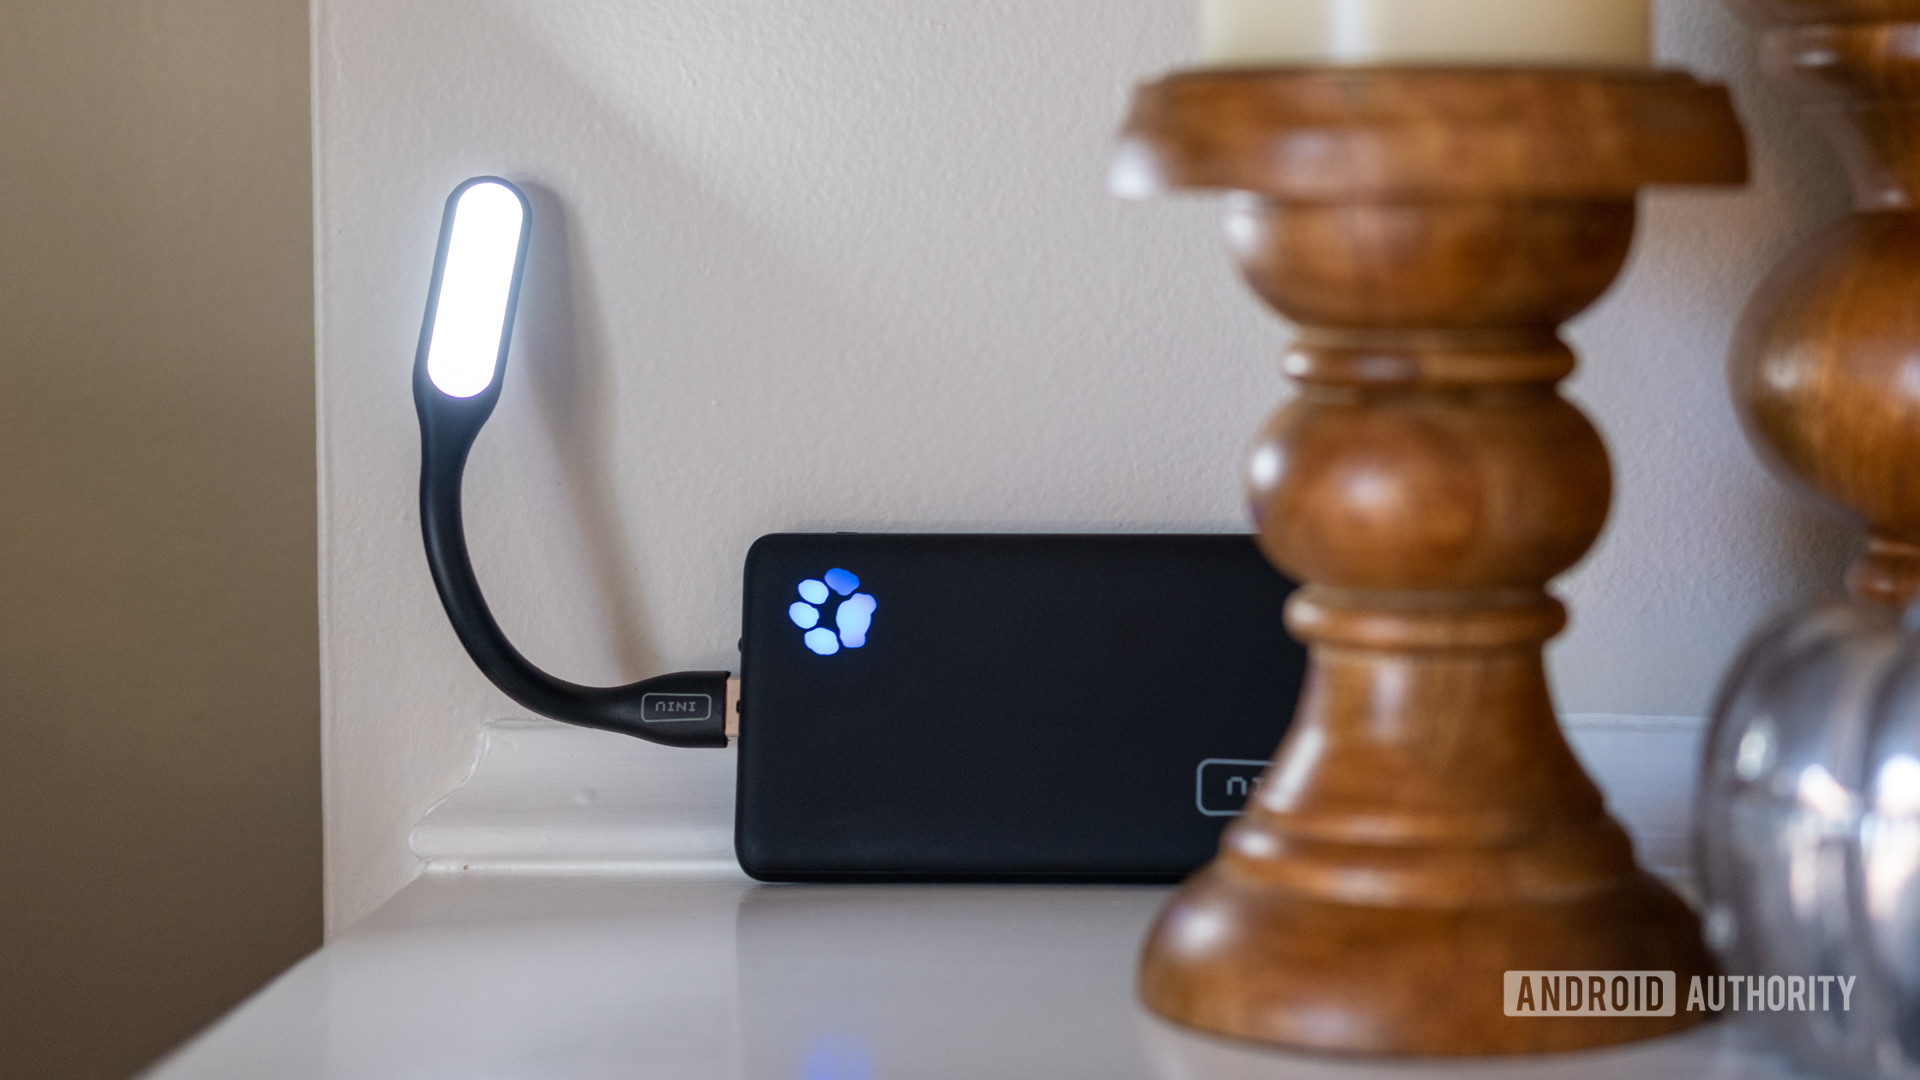 The INIU power bank with the USB-A LED light